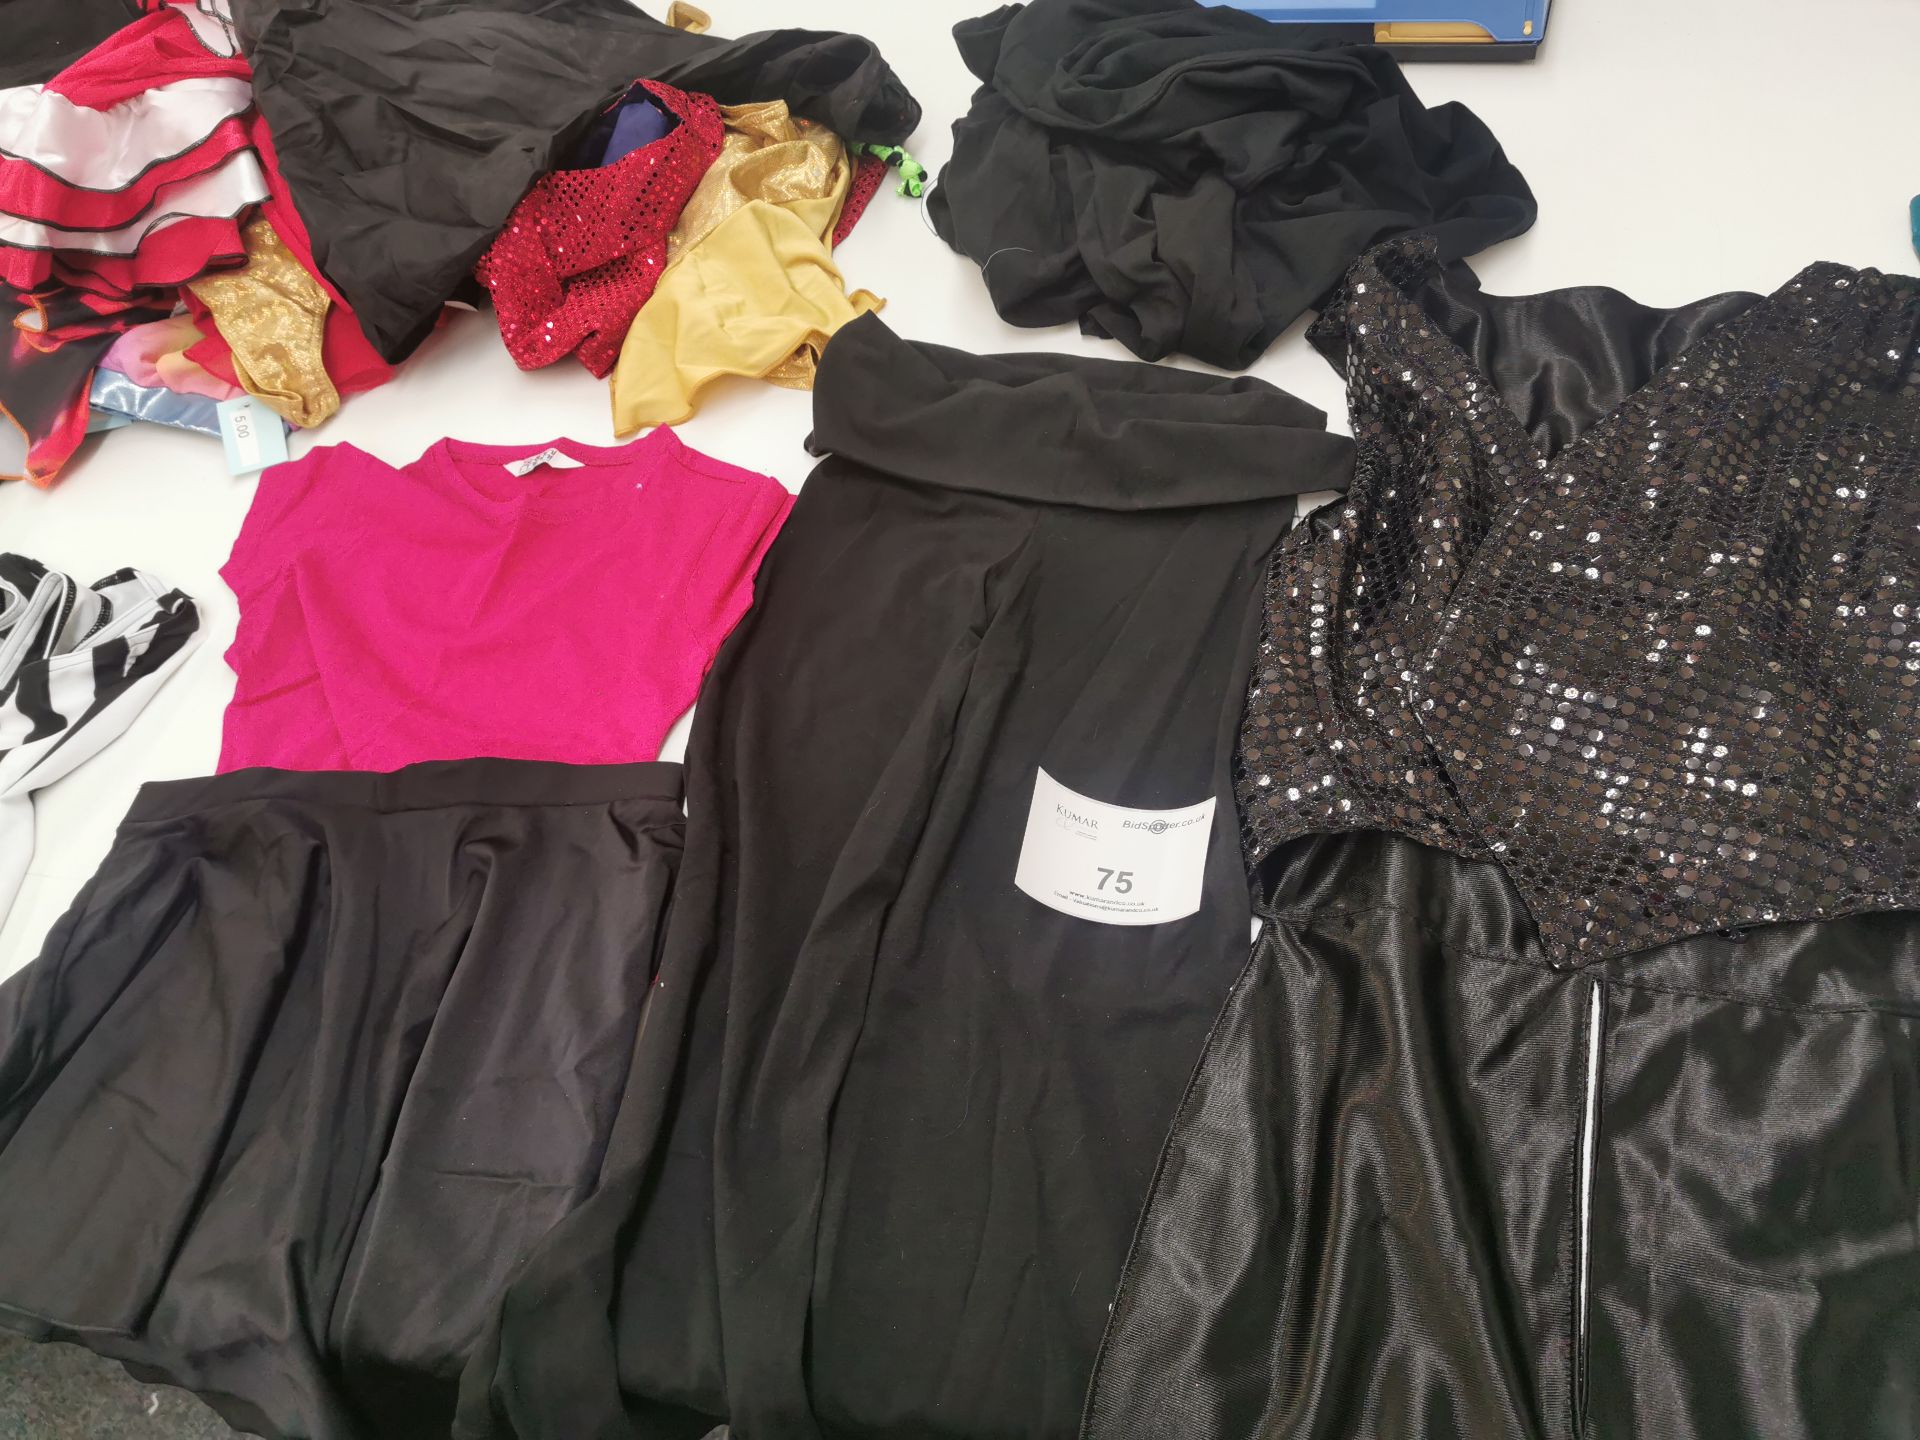 100pc Childrens clothes including dresses,trousers,catsuits,leotards.Various sizes and designs - Image 3 of 8